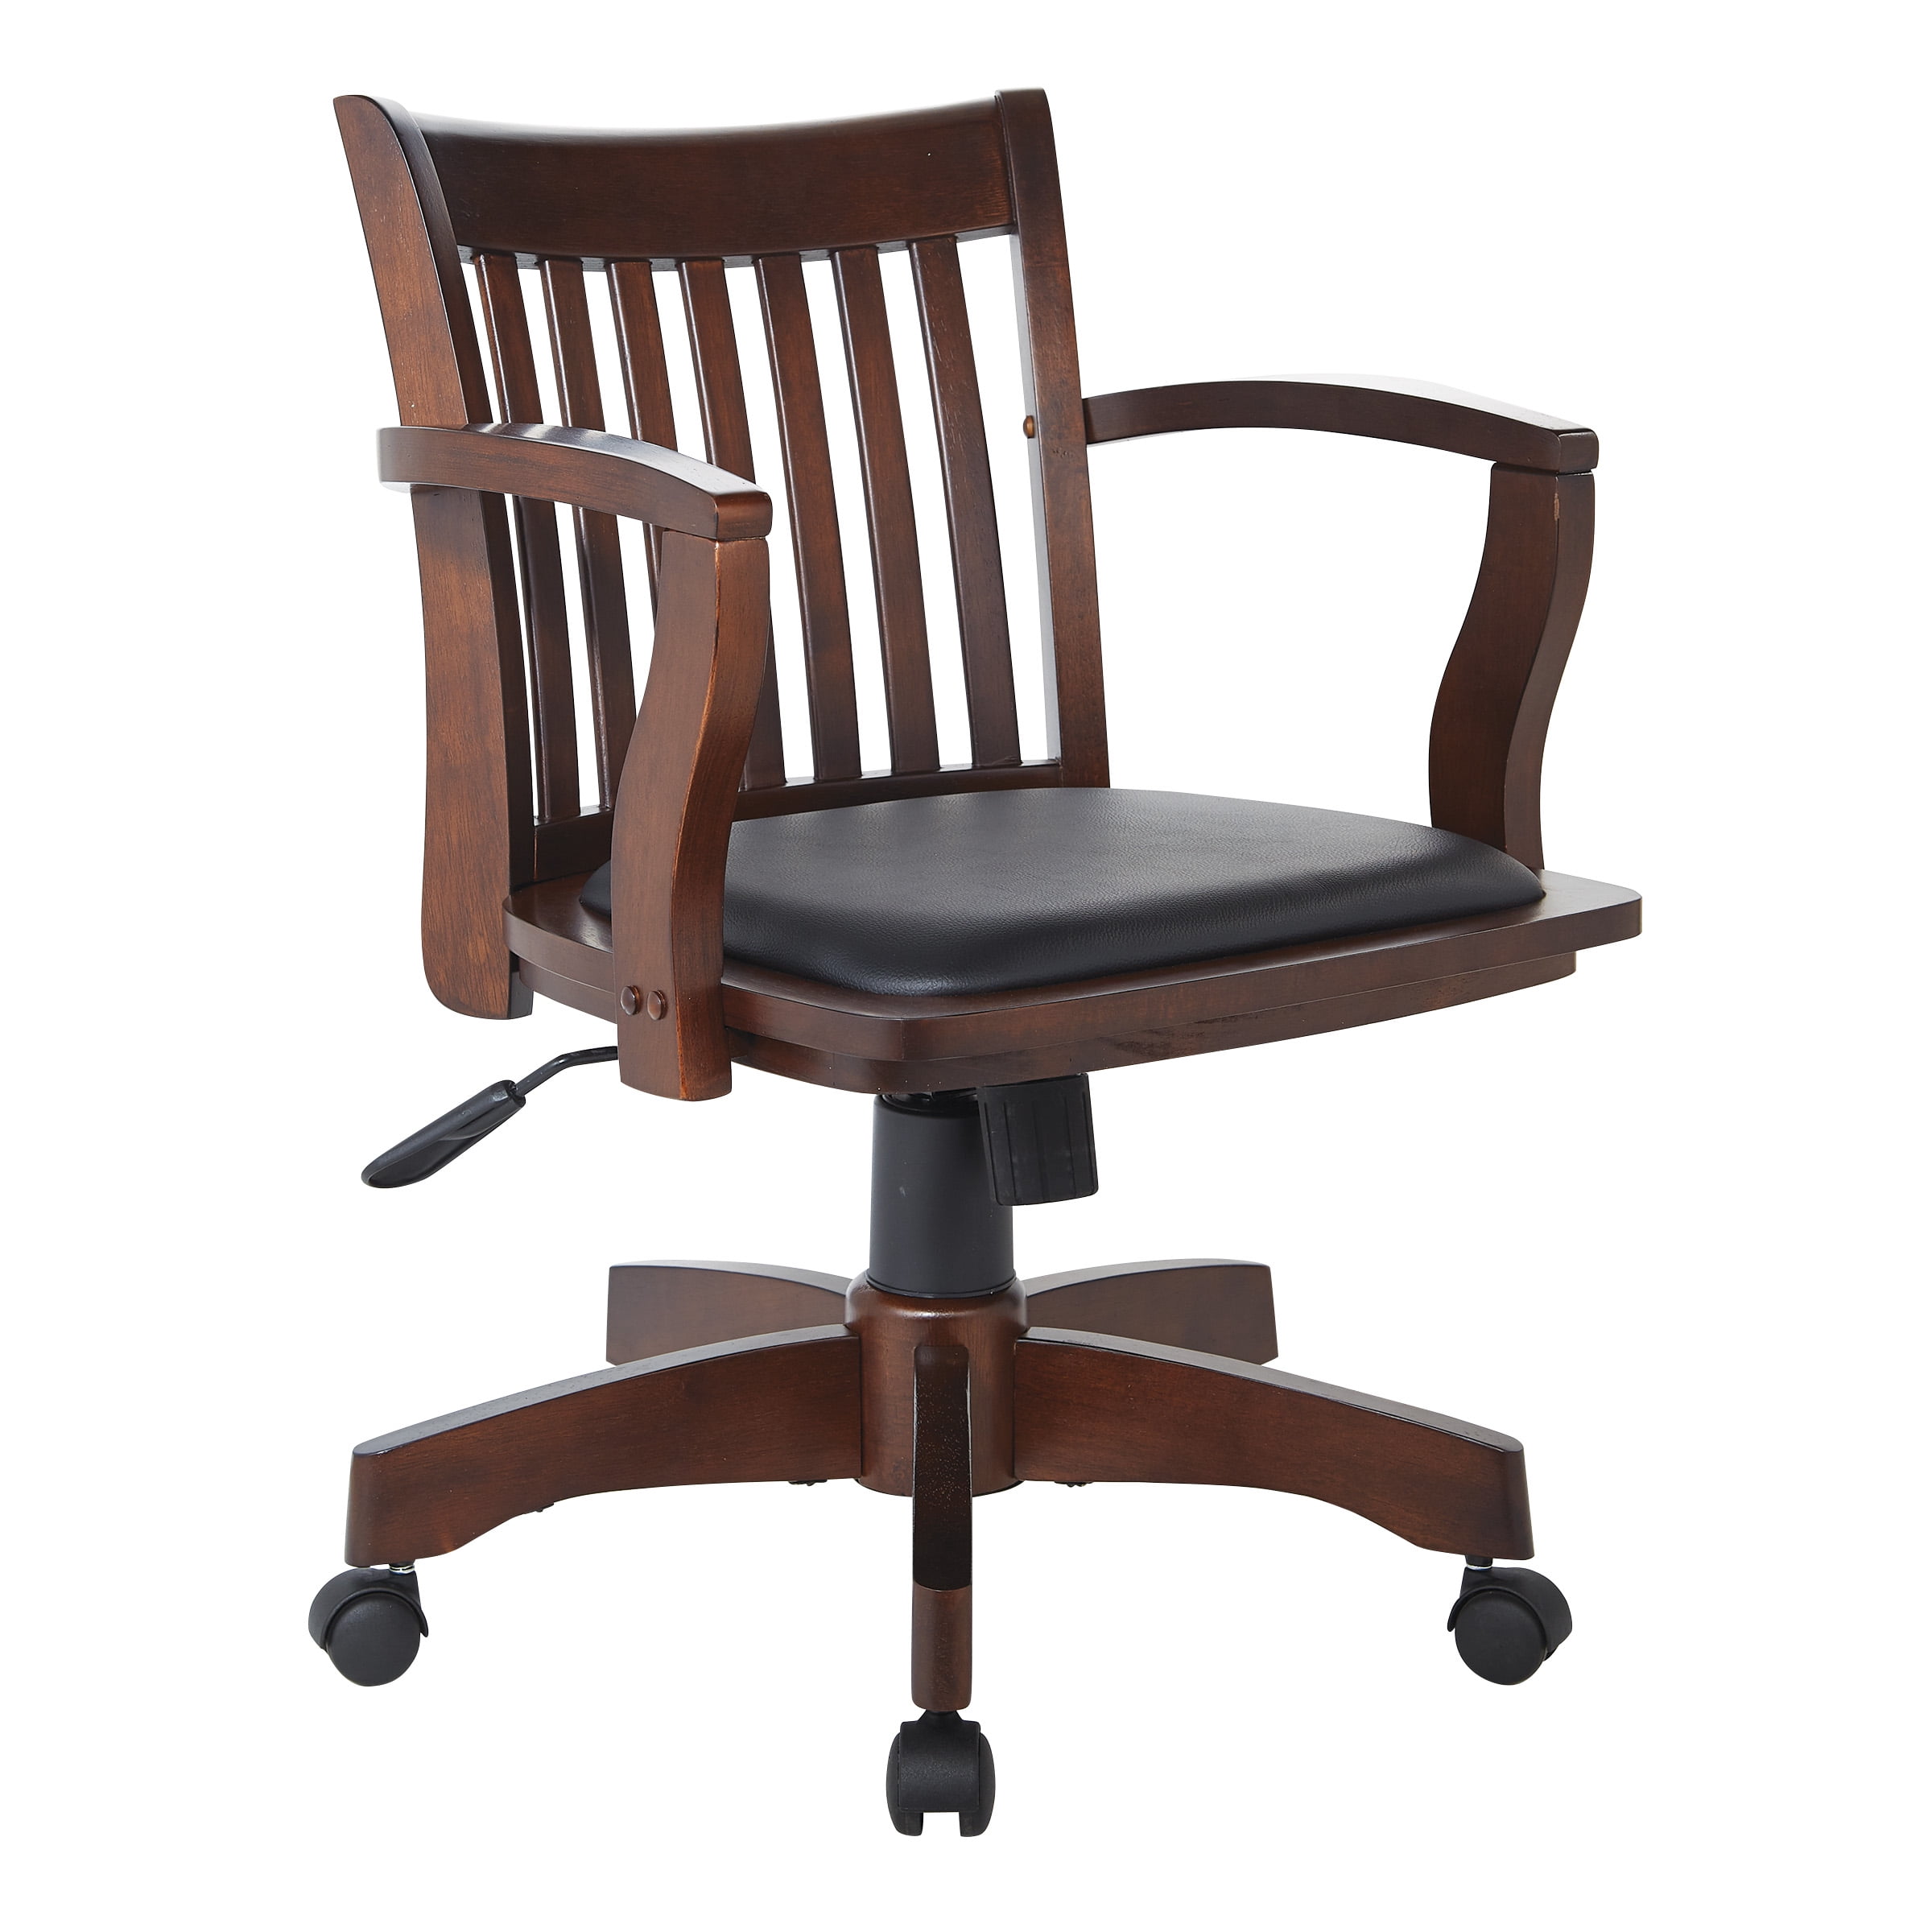 Office Star 101FW Wood Chair Fruit Wood for sale online 